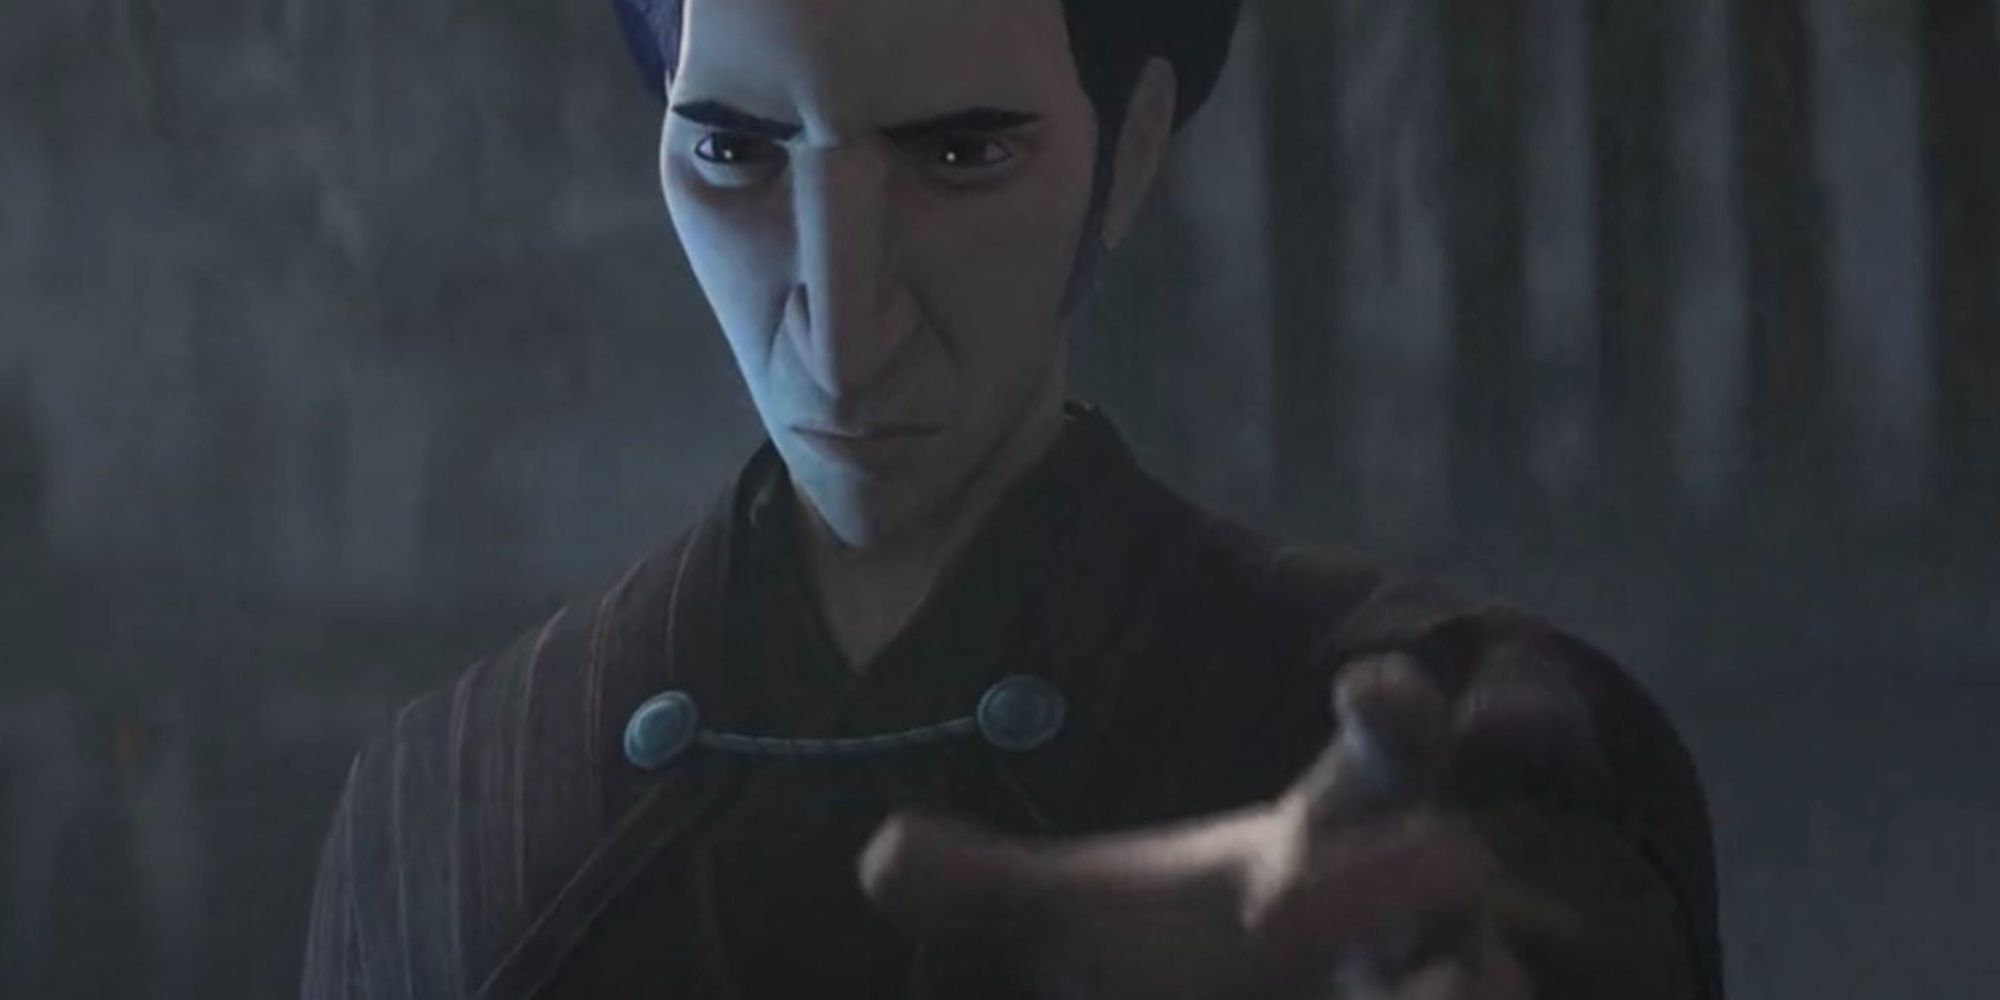 A young Count Dooku uses the Force in Tales of the Jedi.